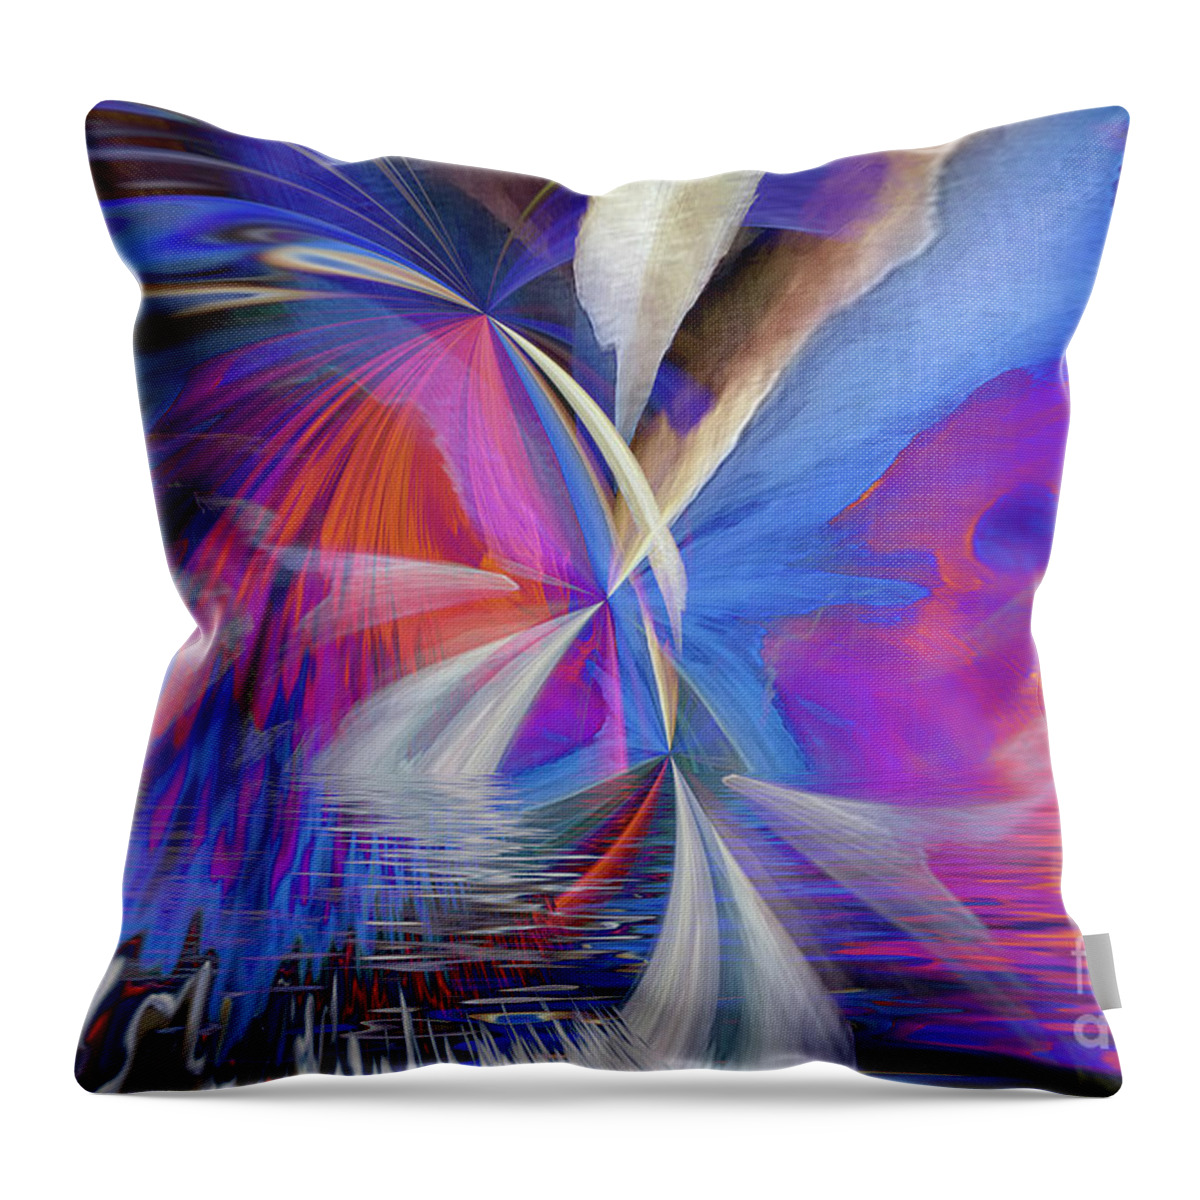 Transition Into New Life And New Beginnings Throw Pillow featuring the digital art Transition 2016 by Margie Chapman